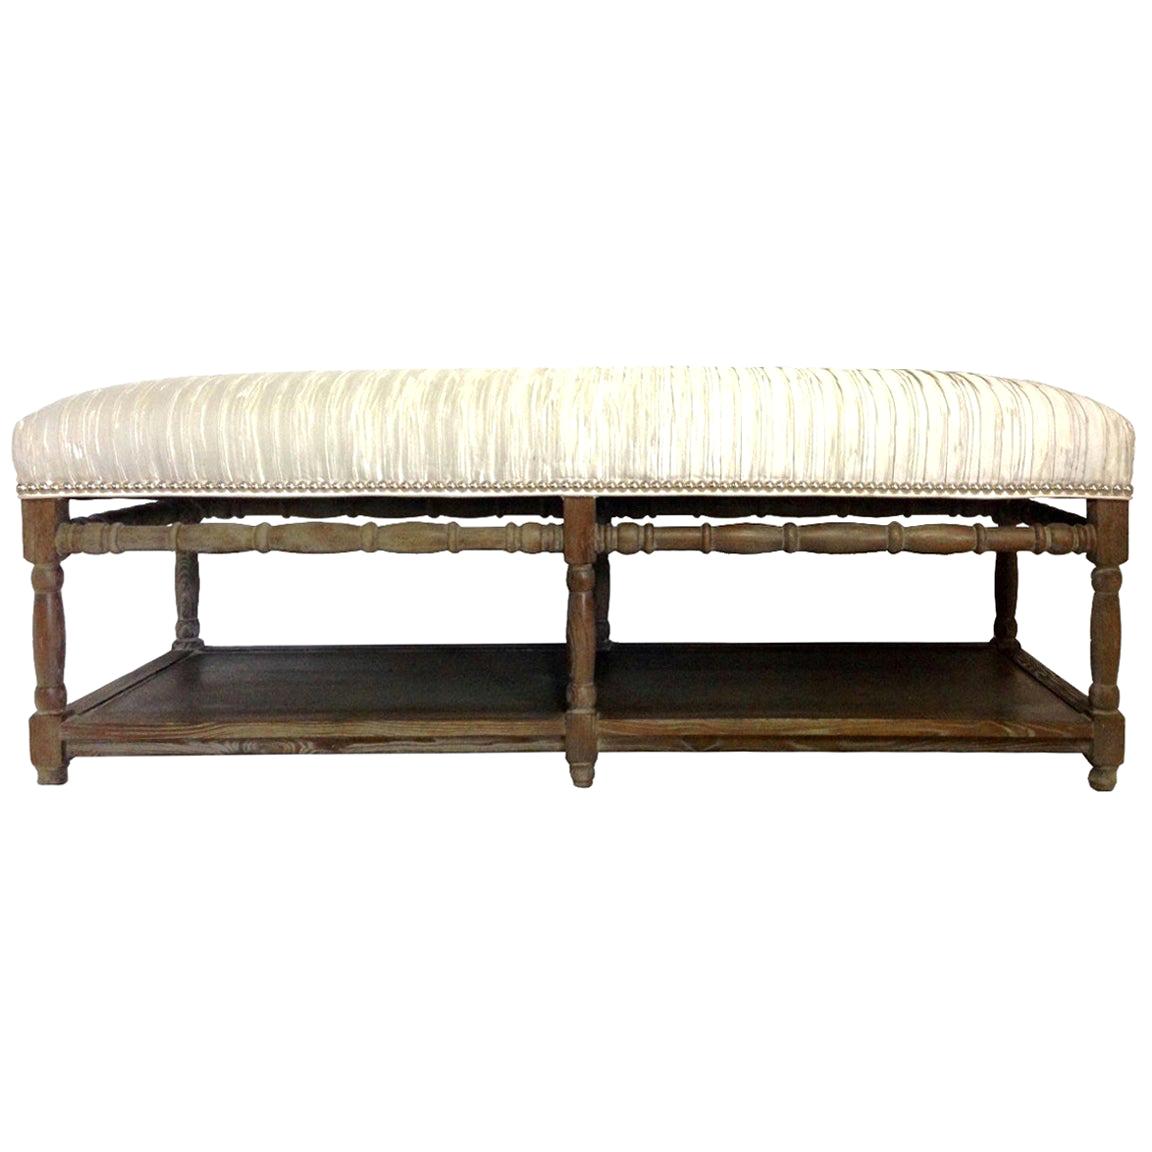 21st Century Modern Cerused Wood and Silver Silk Metallic Upholstered Wood Bench For Sale